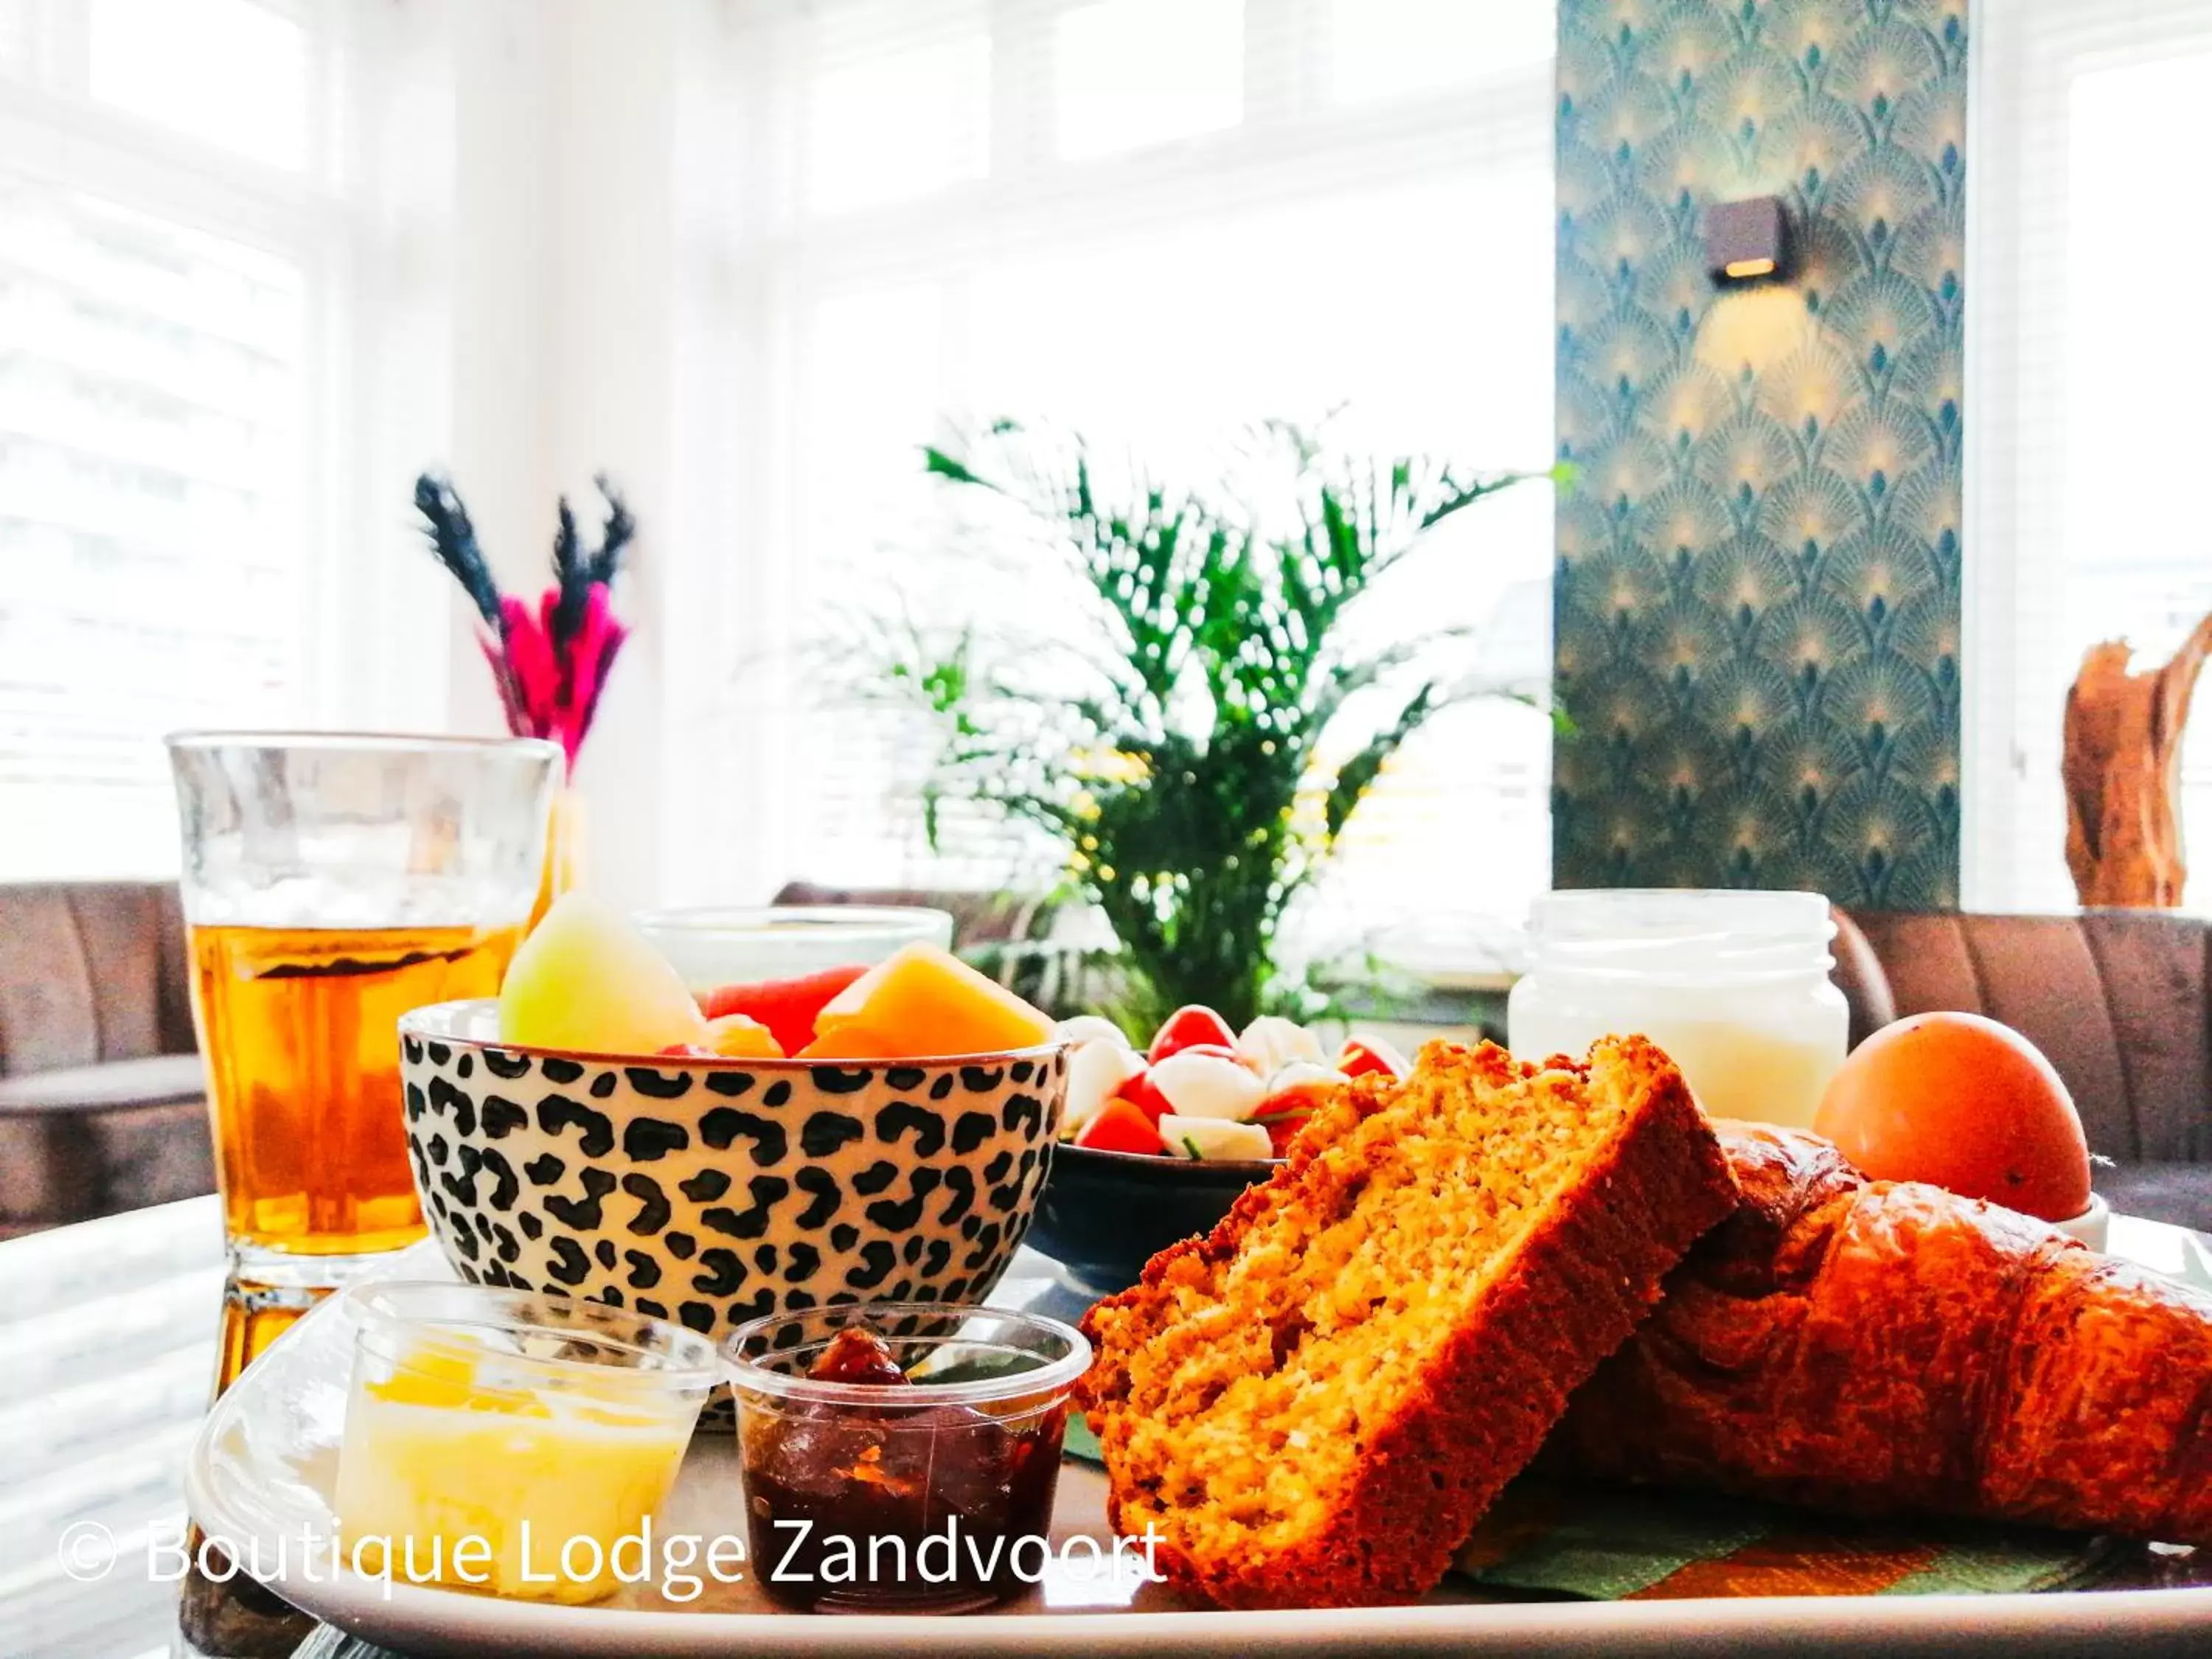 Food and drinks in Boutique Lodge Zandvoort